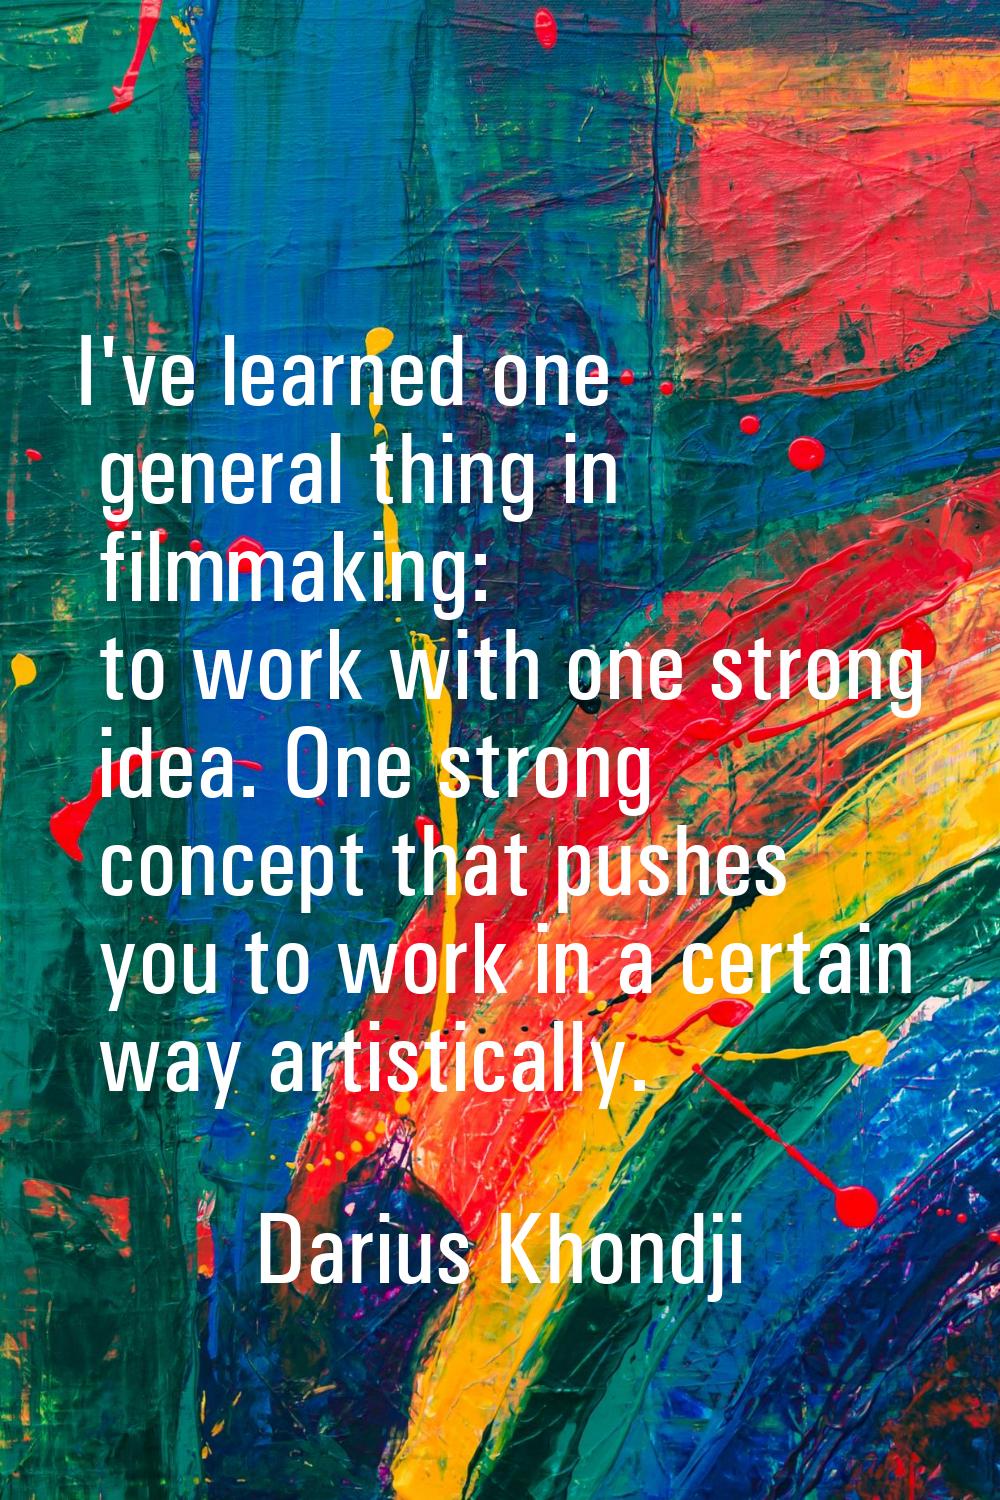 I've learned one general thing in filmmaking: to work with one strong idea. One strong concept that